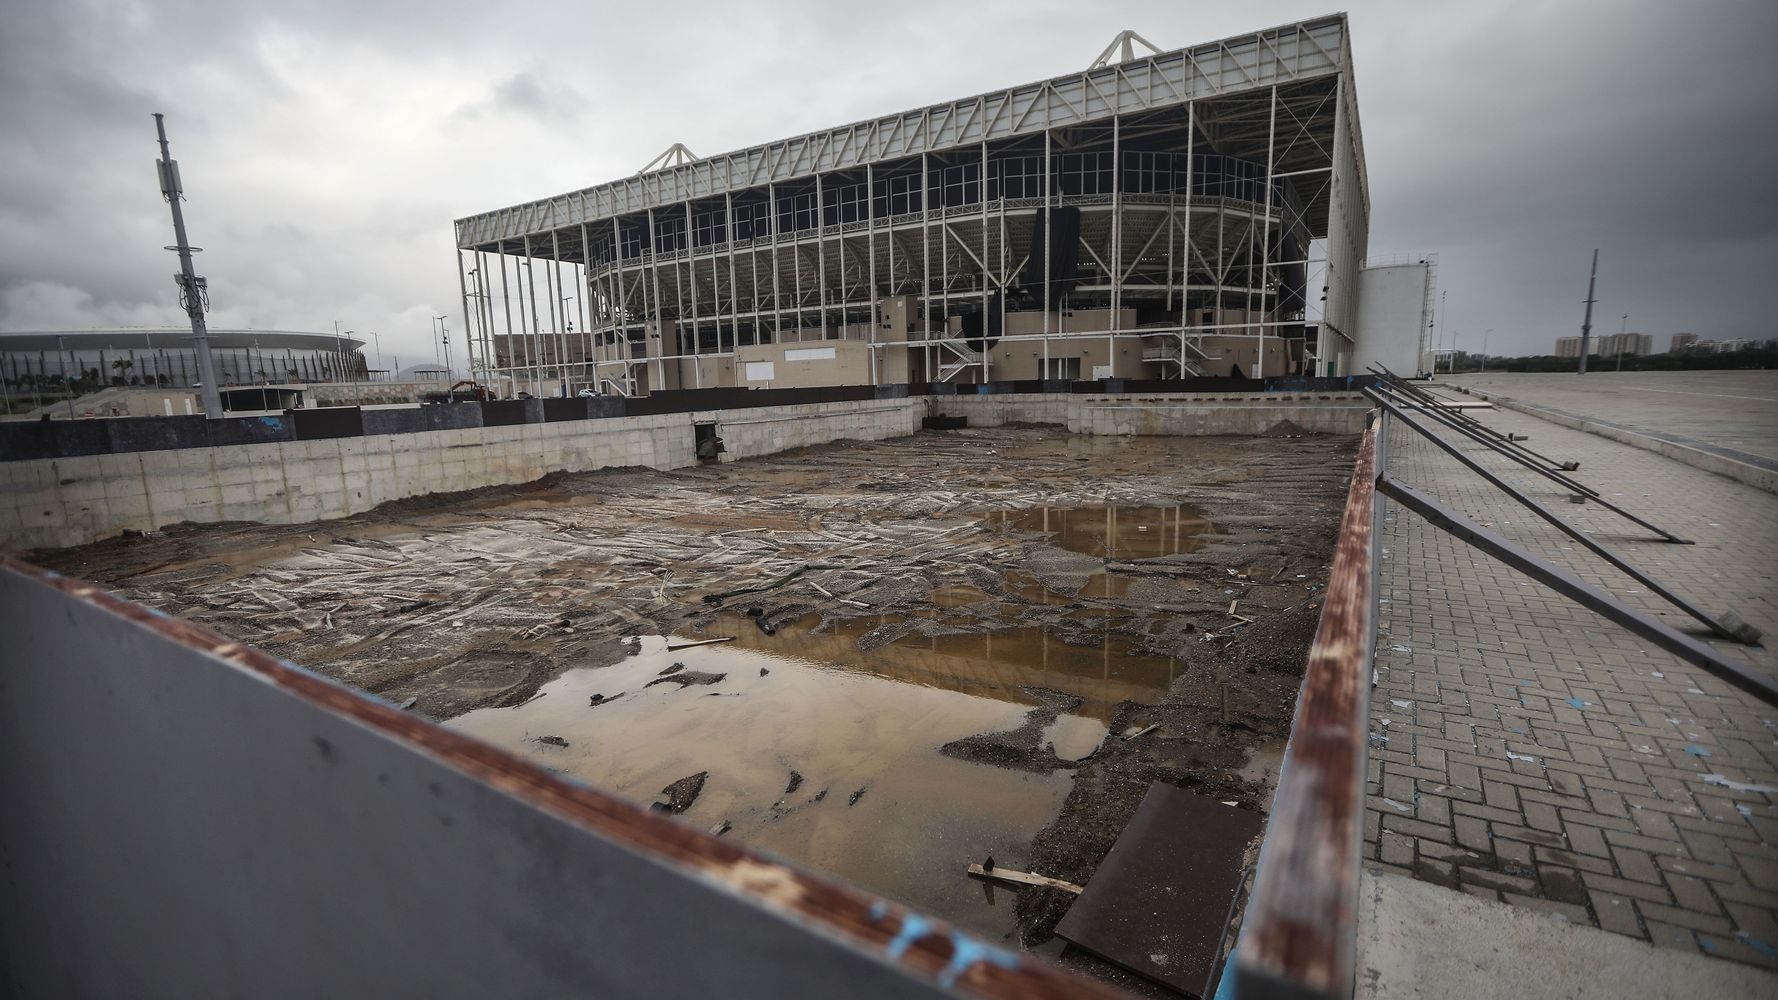 It S Been Just 7 Months Since The Rio Olympics And This Is What The Venues Look Like Now Huffpost Null